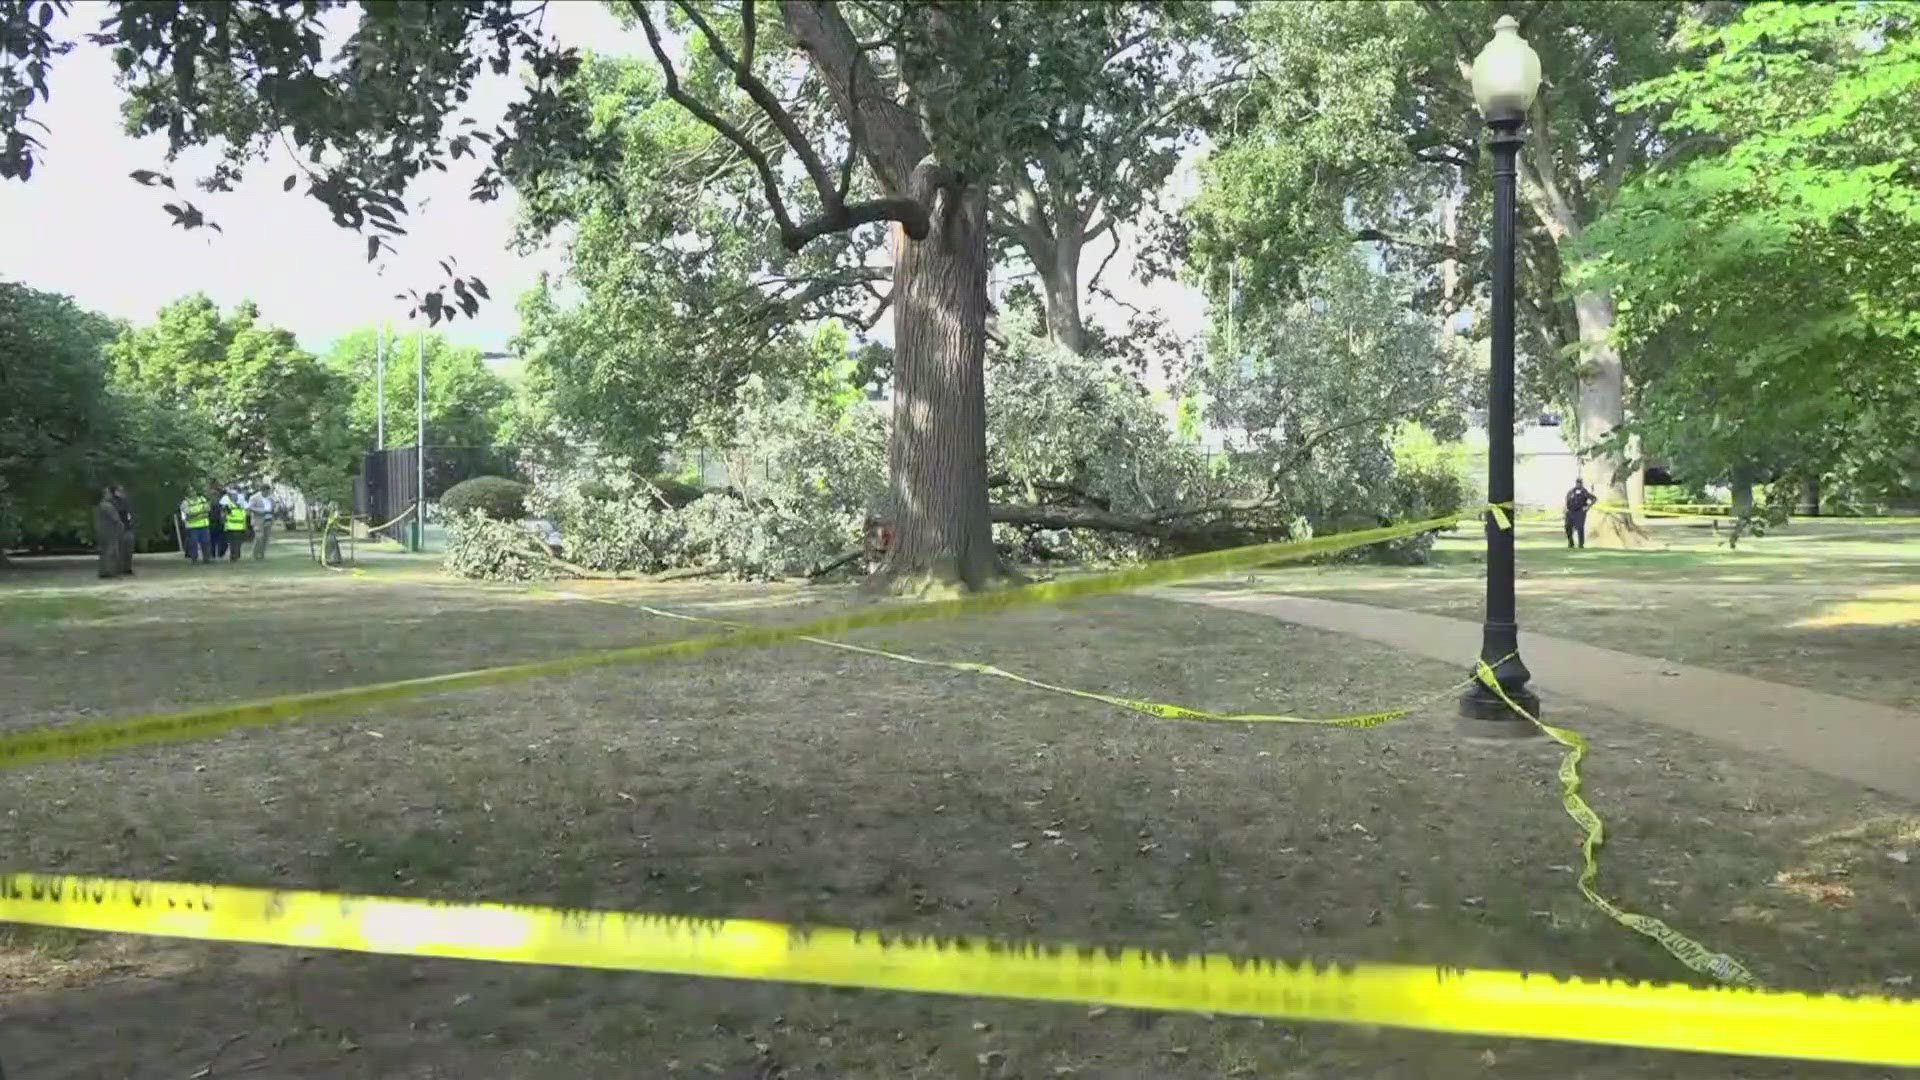 A woman has died after being trapped under a large tree in Garfield Park Wednesday morning.